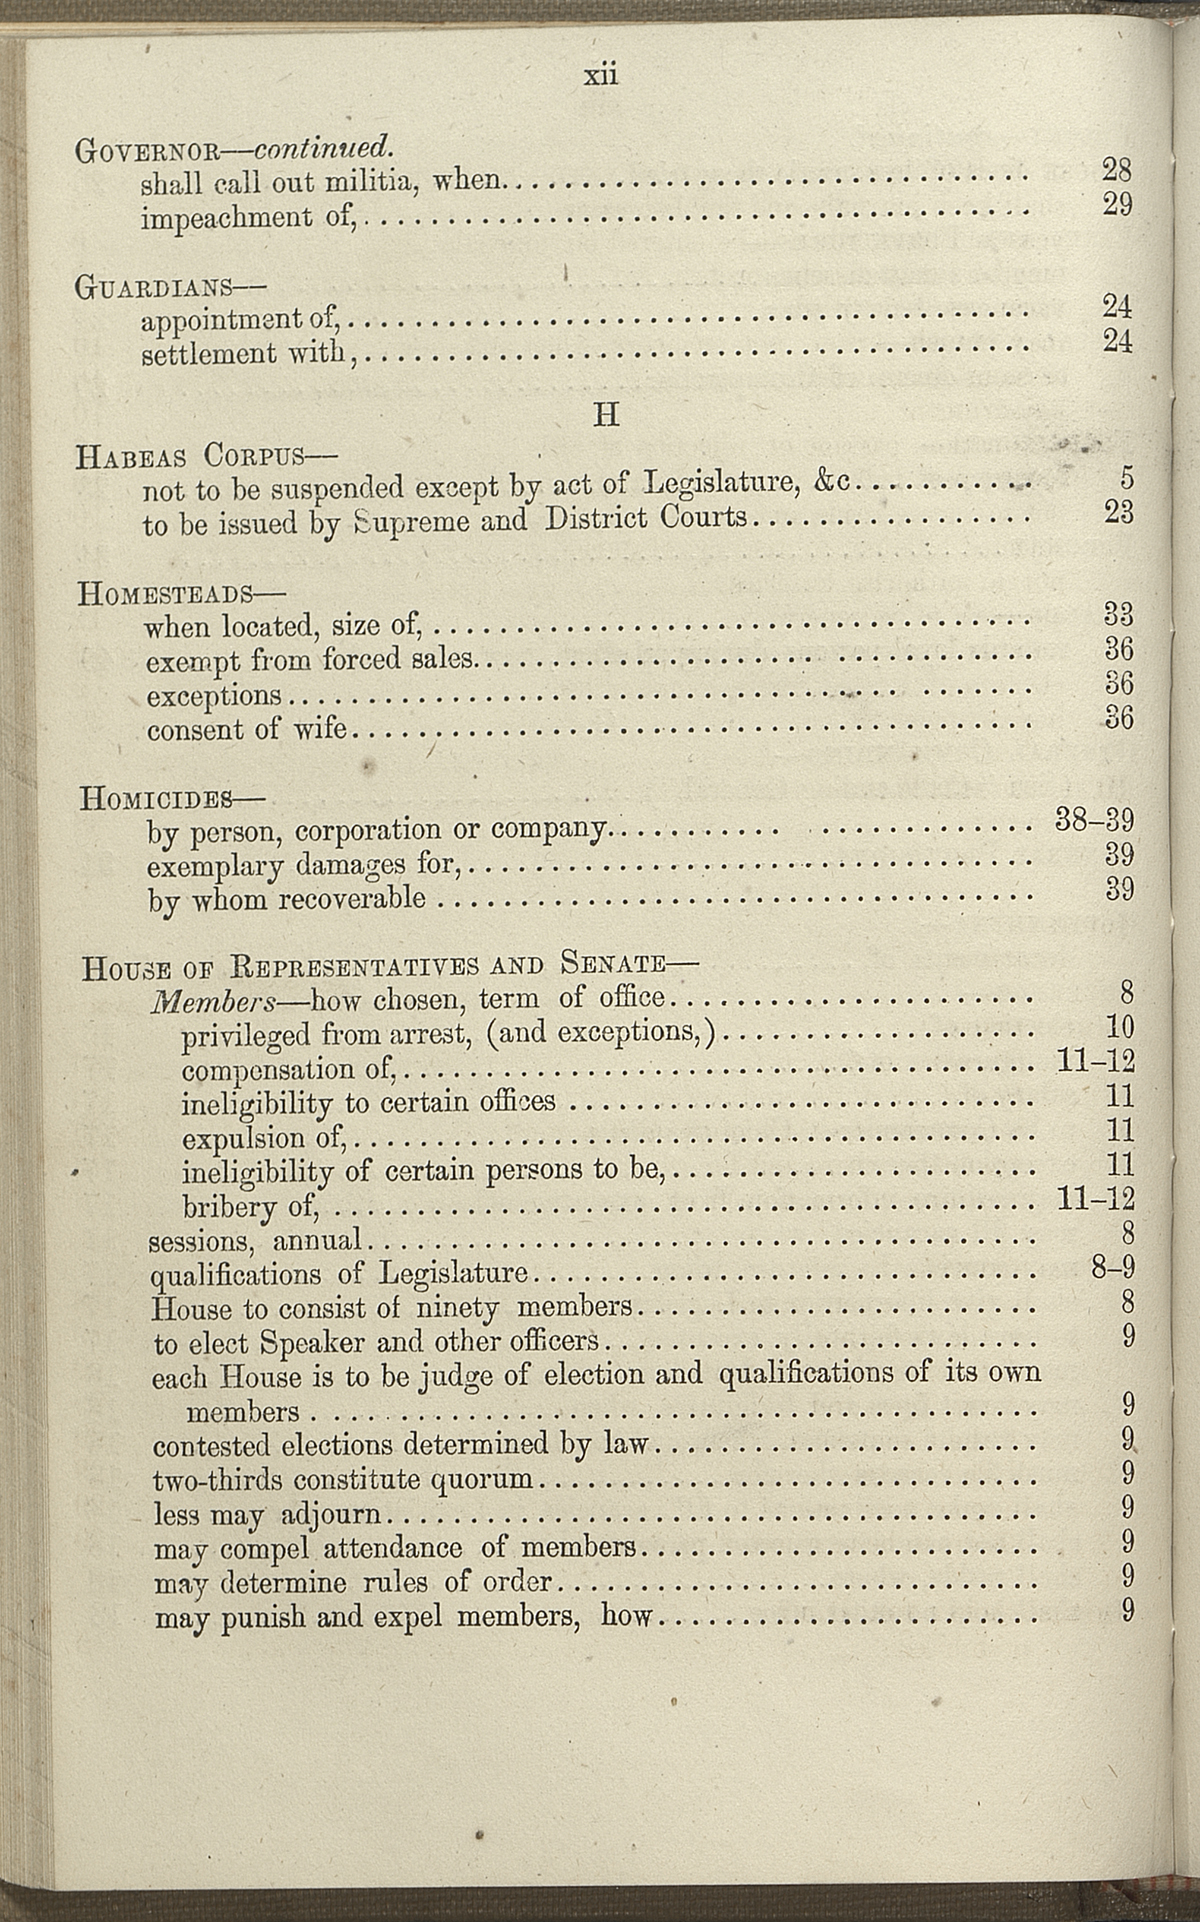 page 12 - 1869 index